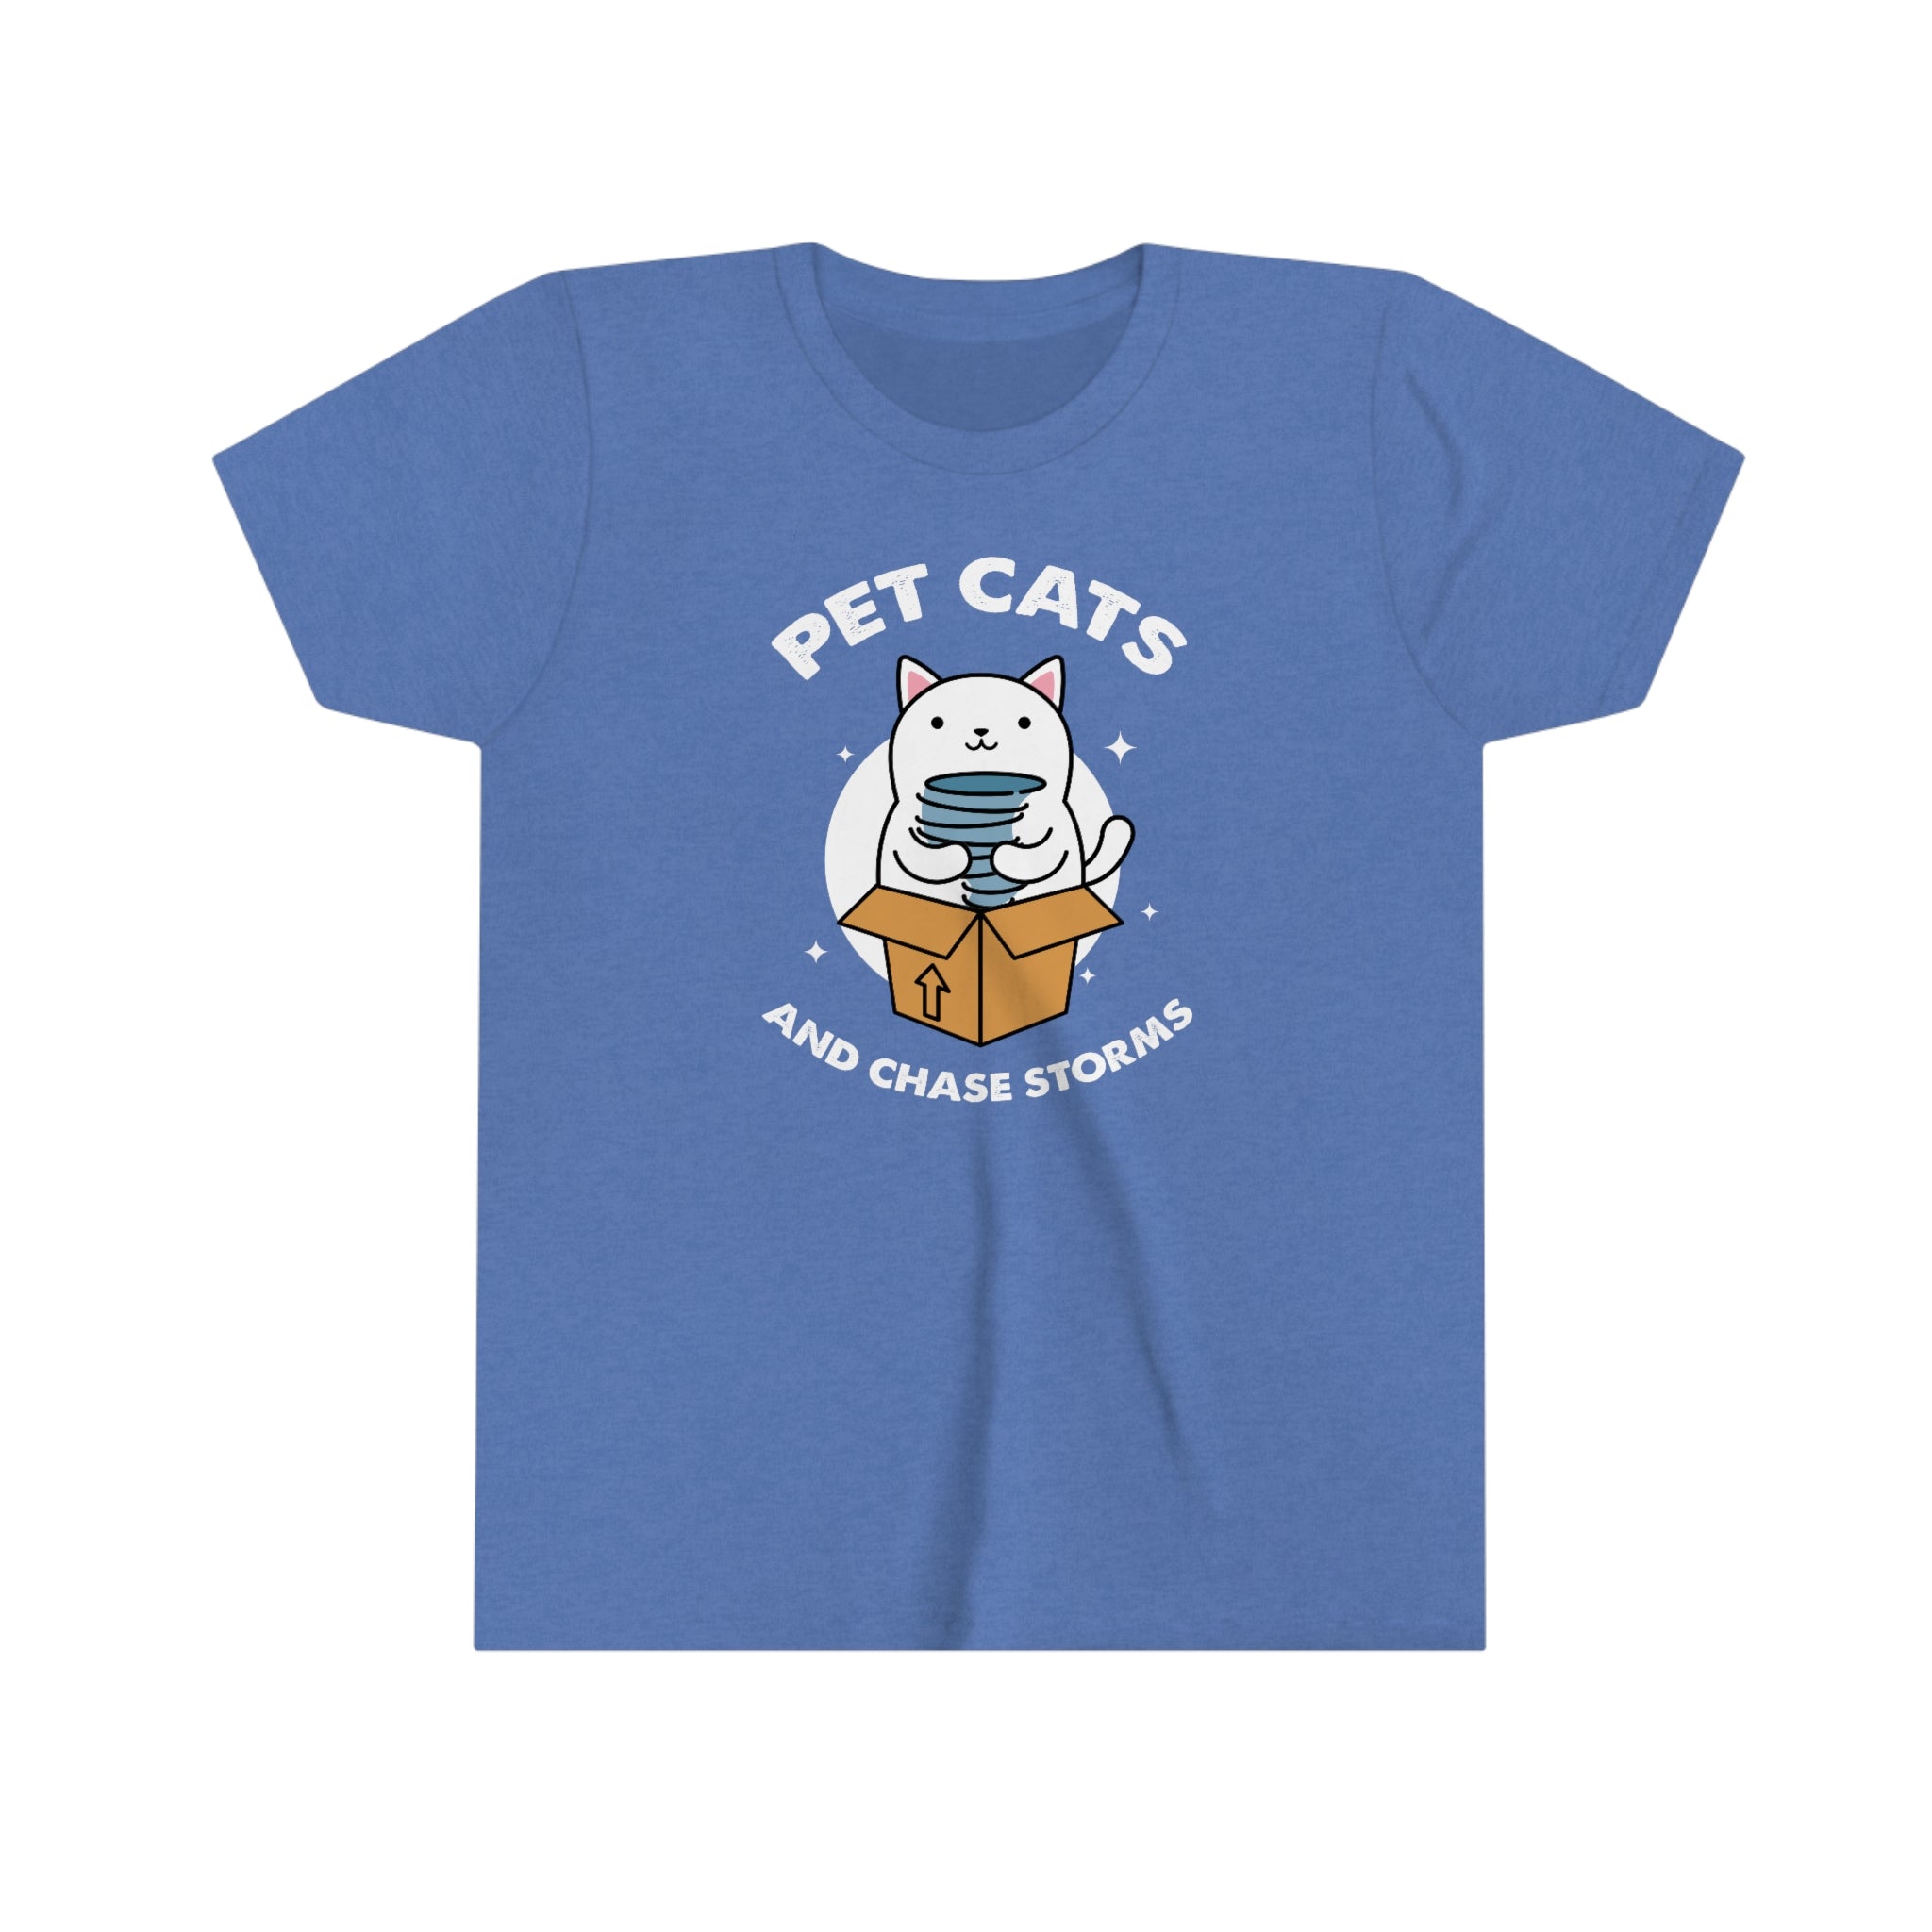 Pet Cats and Chase Storms Kids Tee 